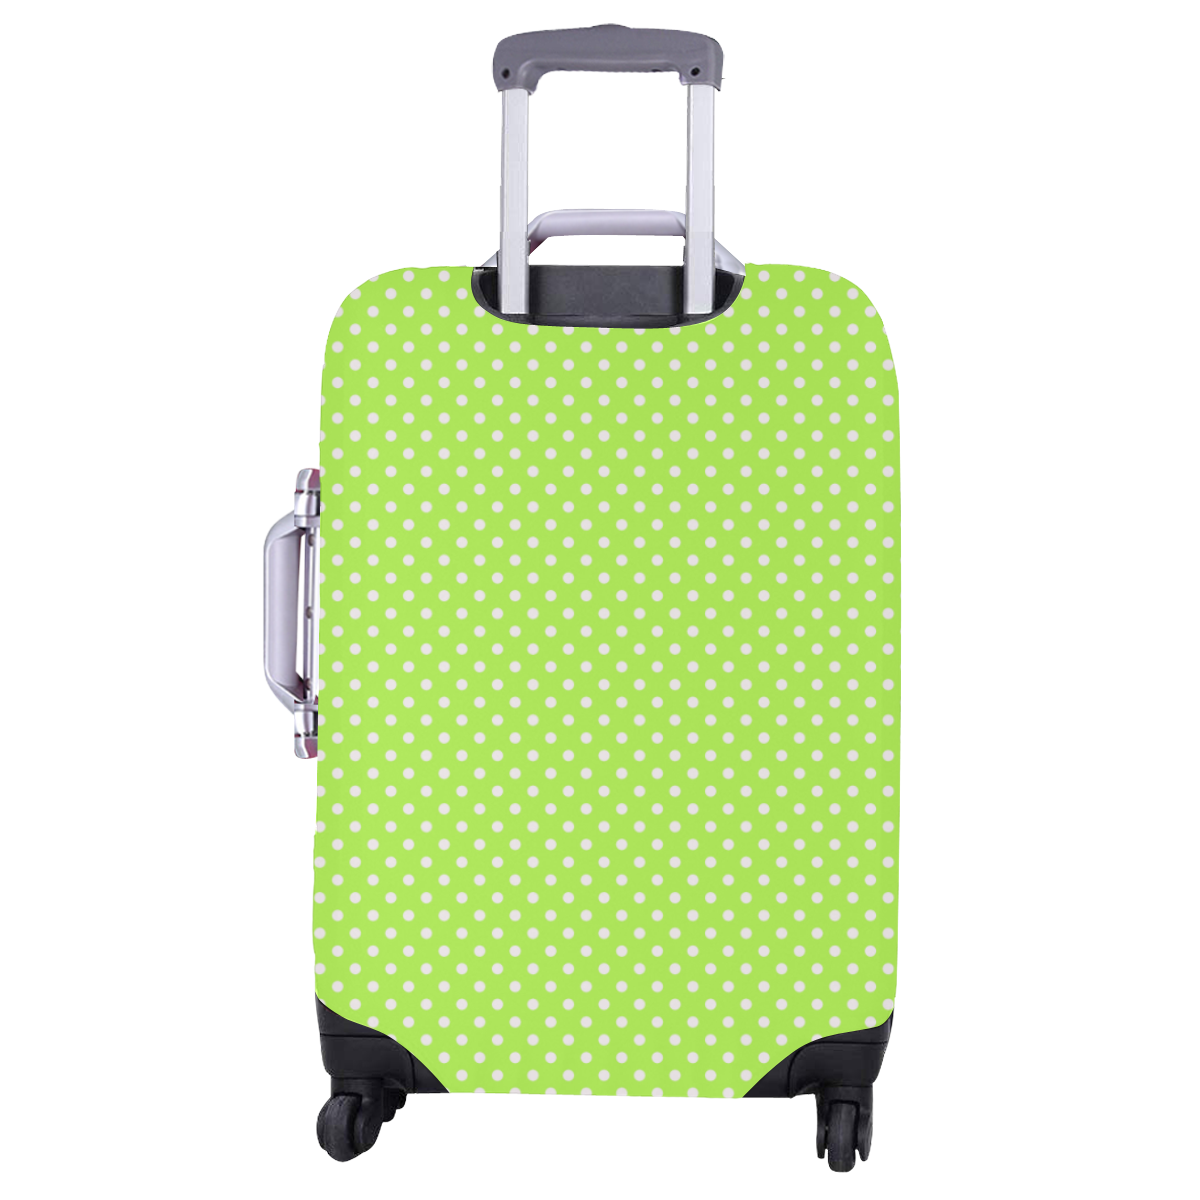 Mint green polka dots Luggage Cover/Large 26"-28"